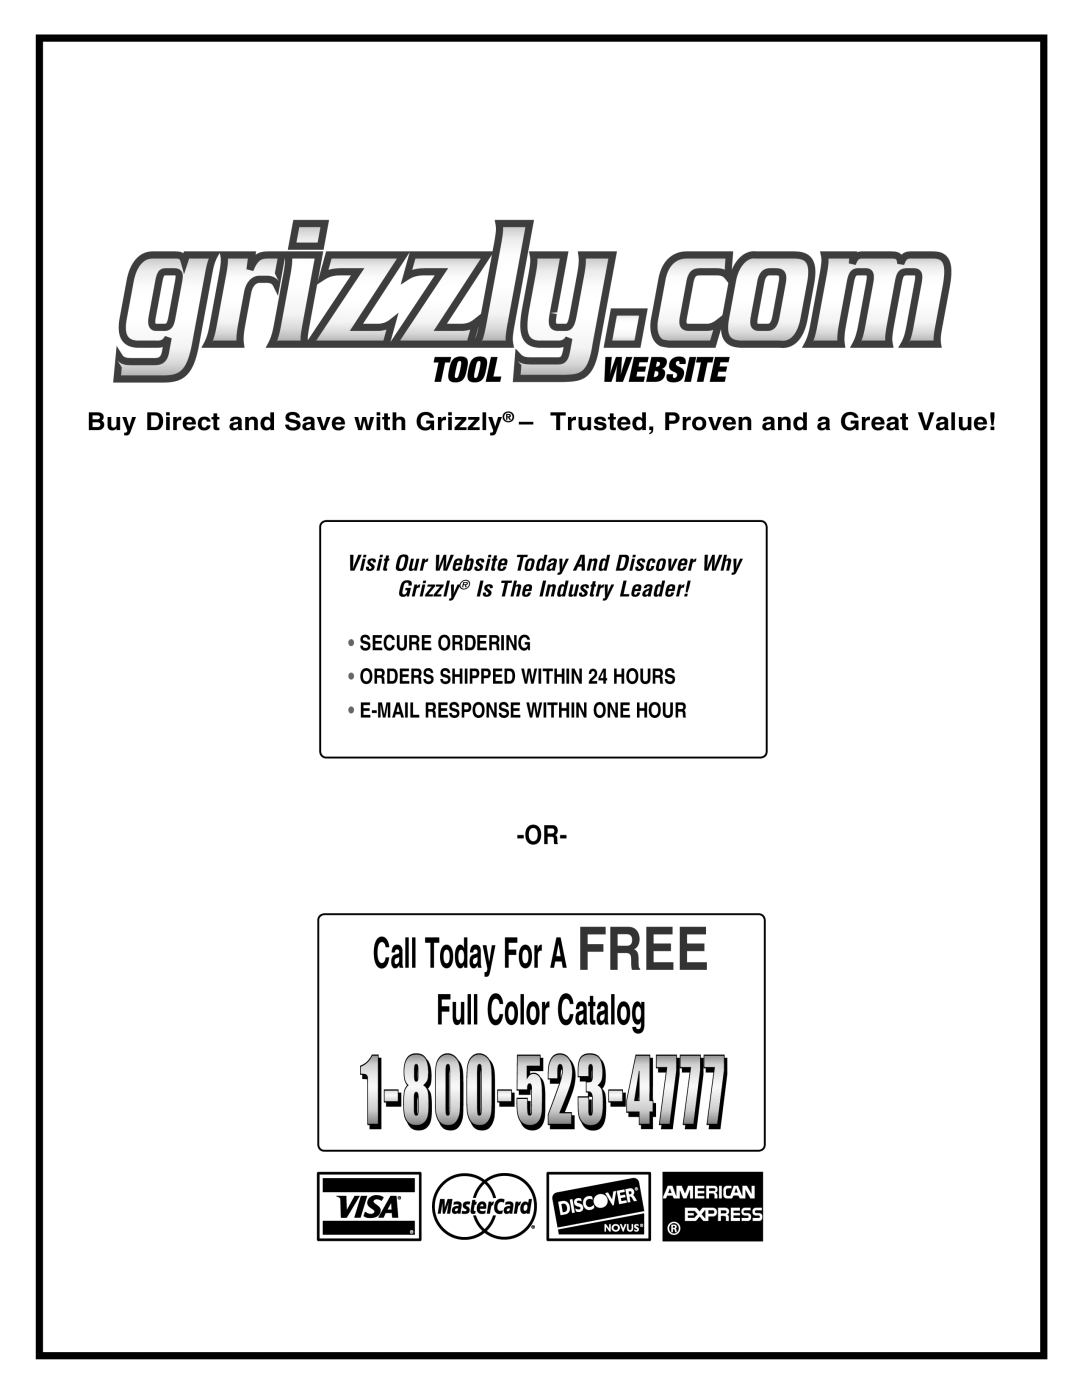 Grizzly MODEL instruction manual Call Today For A FREE Full Color Catalog, Visit Our Website Today And Discover Why 